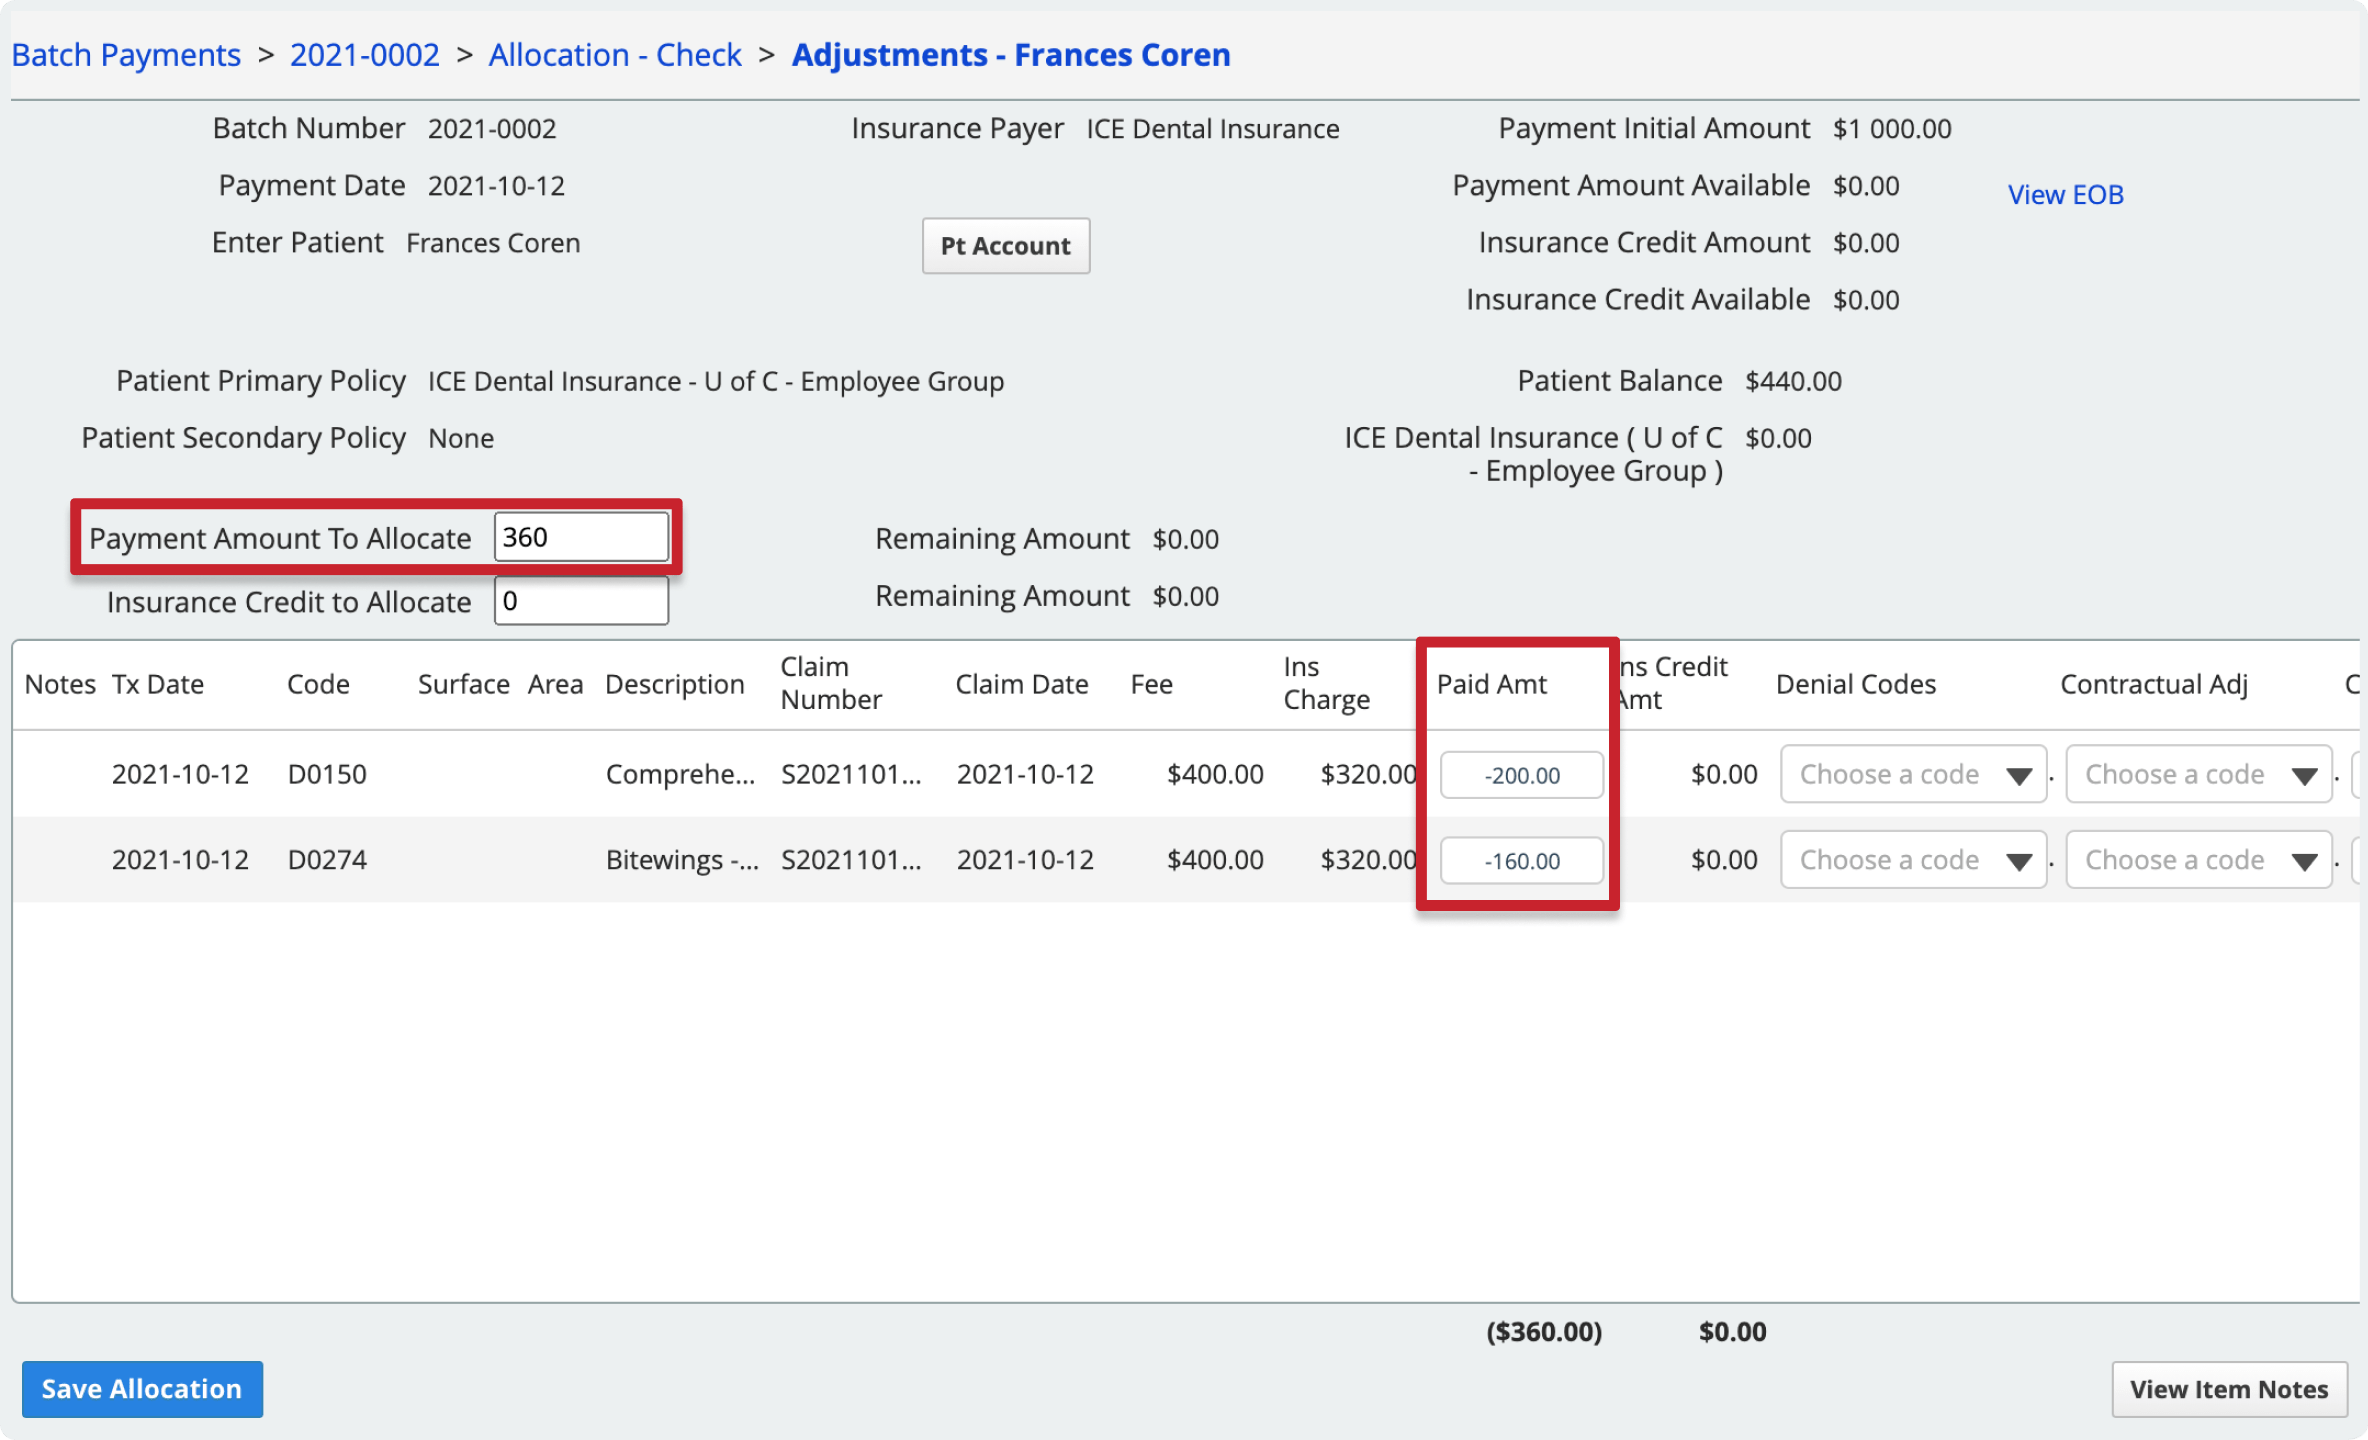 The Payment Amount to Allocate field is just above the the charge table to the left and the Insurance Credit to Allocate field is below it. The Paid Amount field is to the right of the insurance charge amount and the Insurance Credit Amount field is after it but does not appear editable.